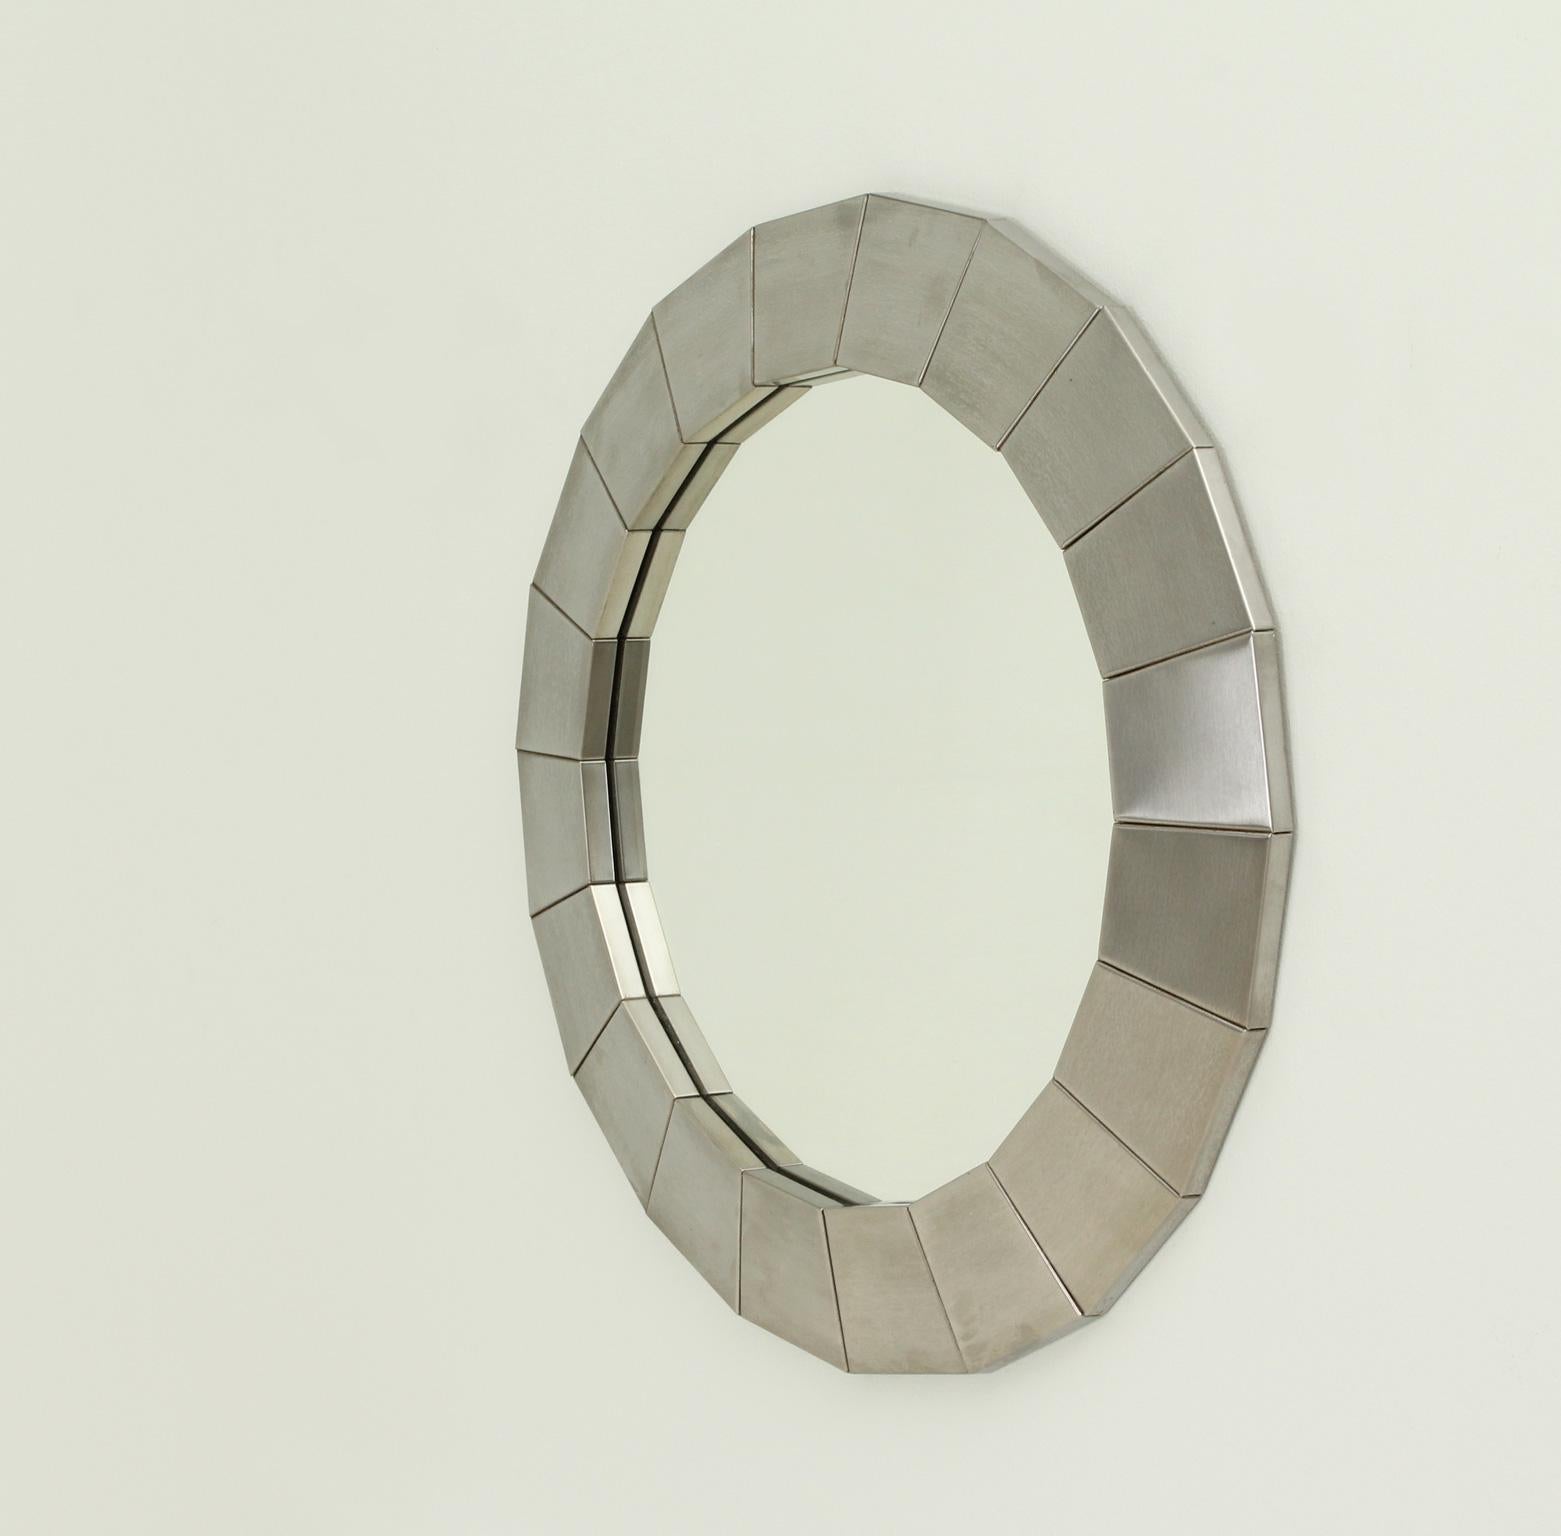 Mid-Century Modern Round Wall Mirror in Brushed Steel, Spain, 1960's For Sale